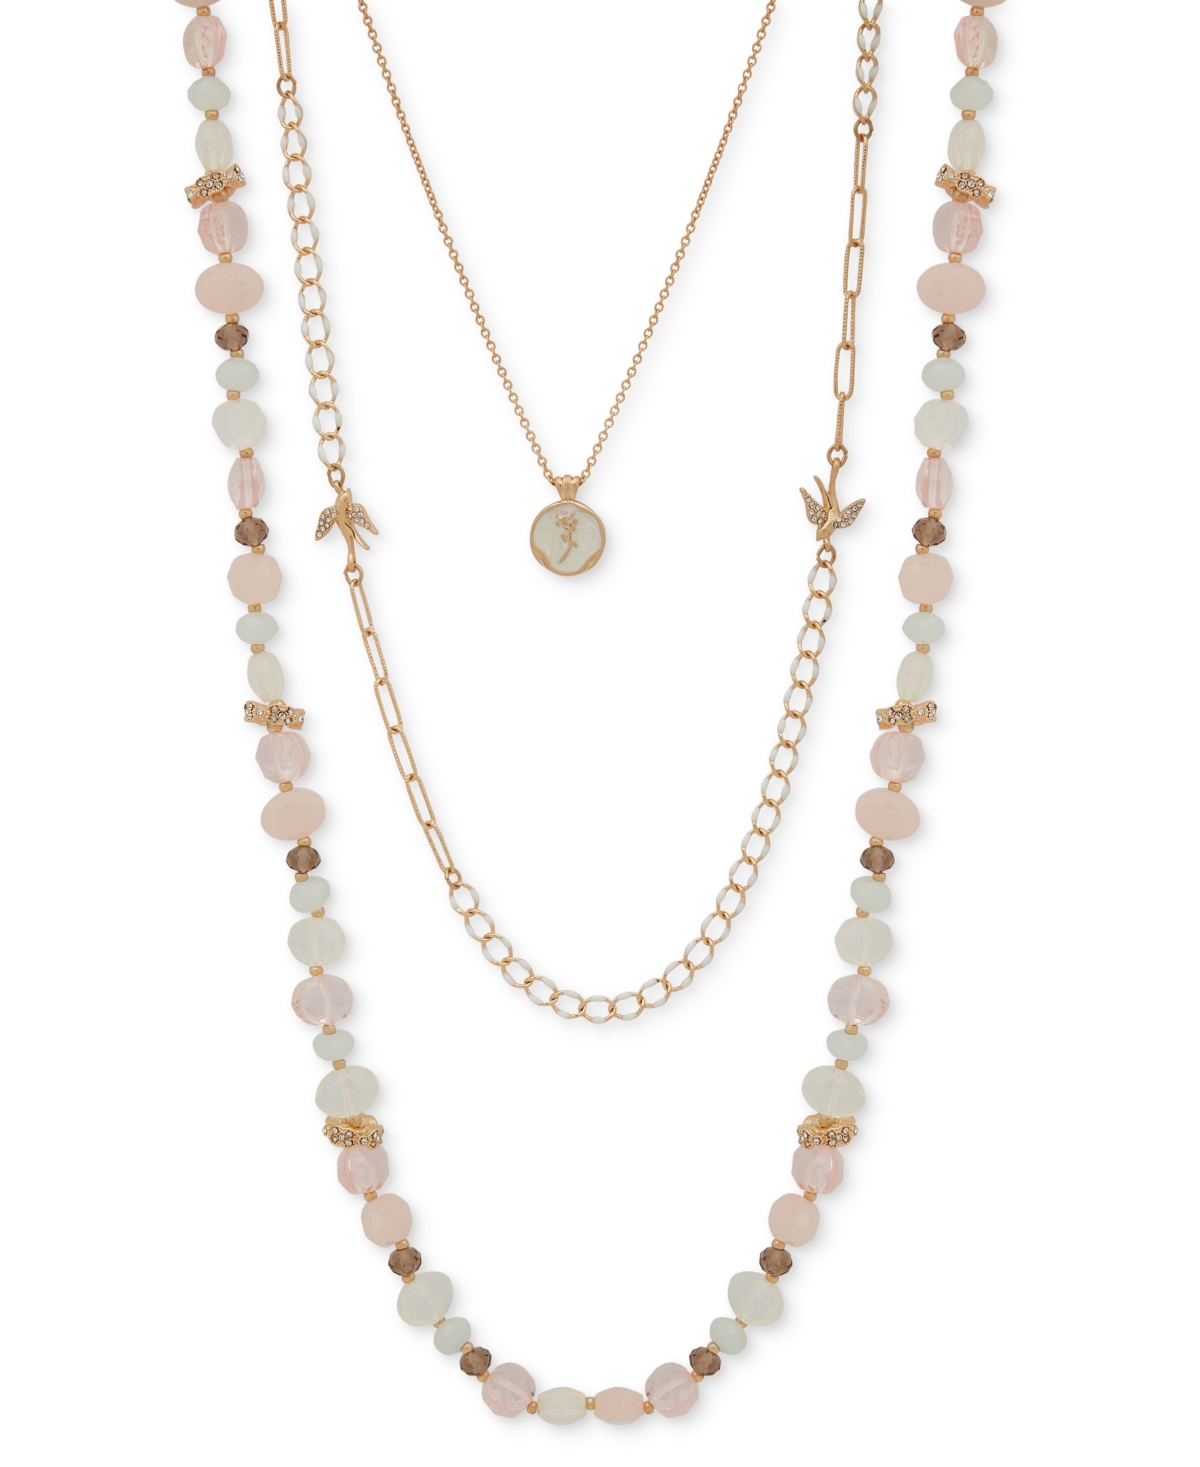 Gold-Tone Bead & Framed Flower Layered Necklace, 16" + 3" extender - Blush